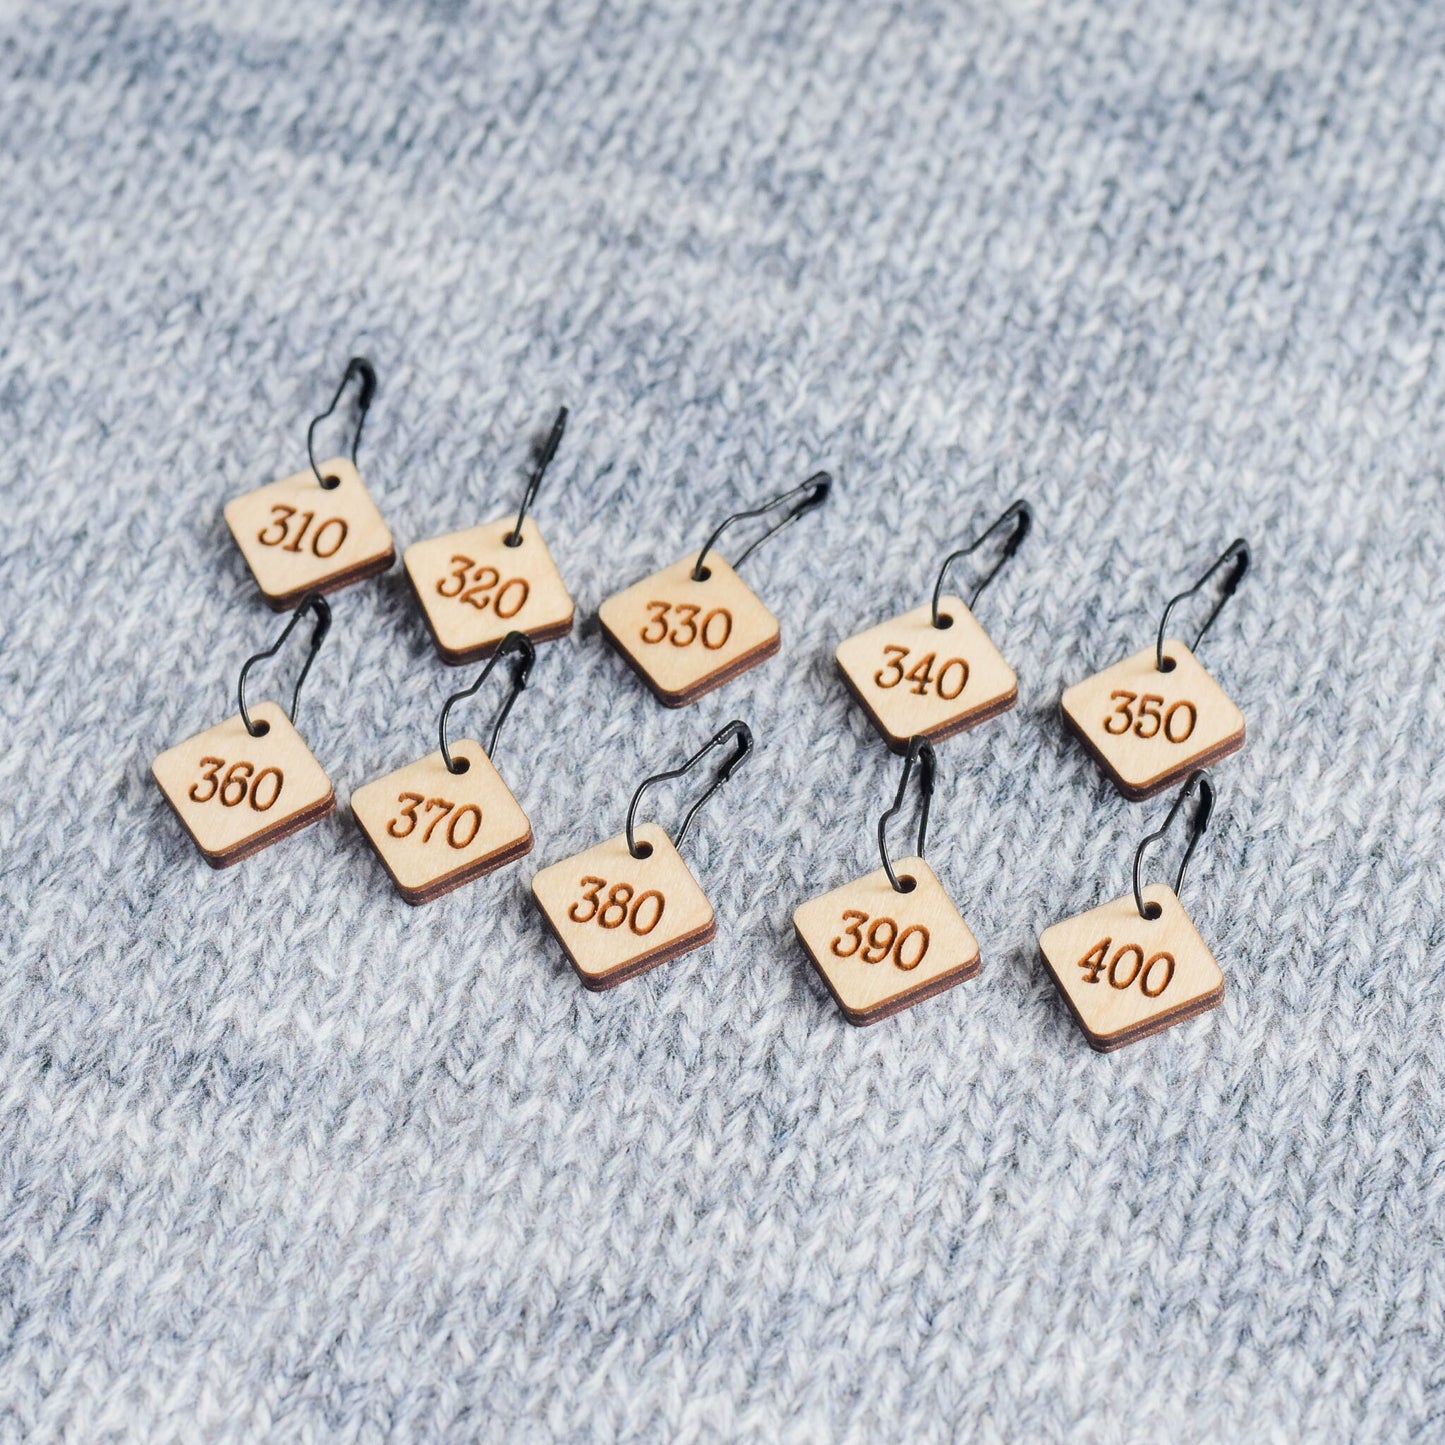 Set of 10 Removable Stitch Markers - 310-400 - Cast On Counting Numbers, Laser Engraved Wood Stitch Markers, Counting Stitch Markers - Birch